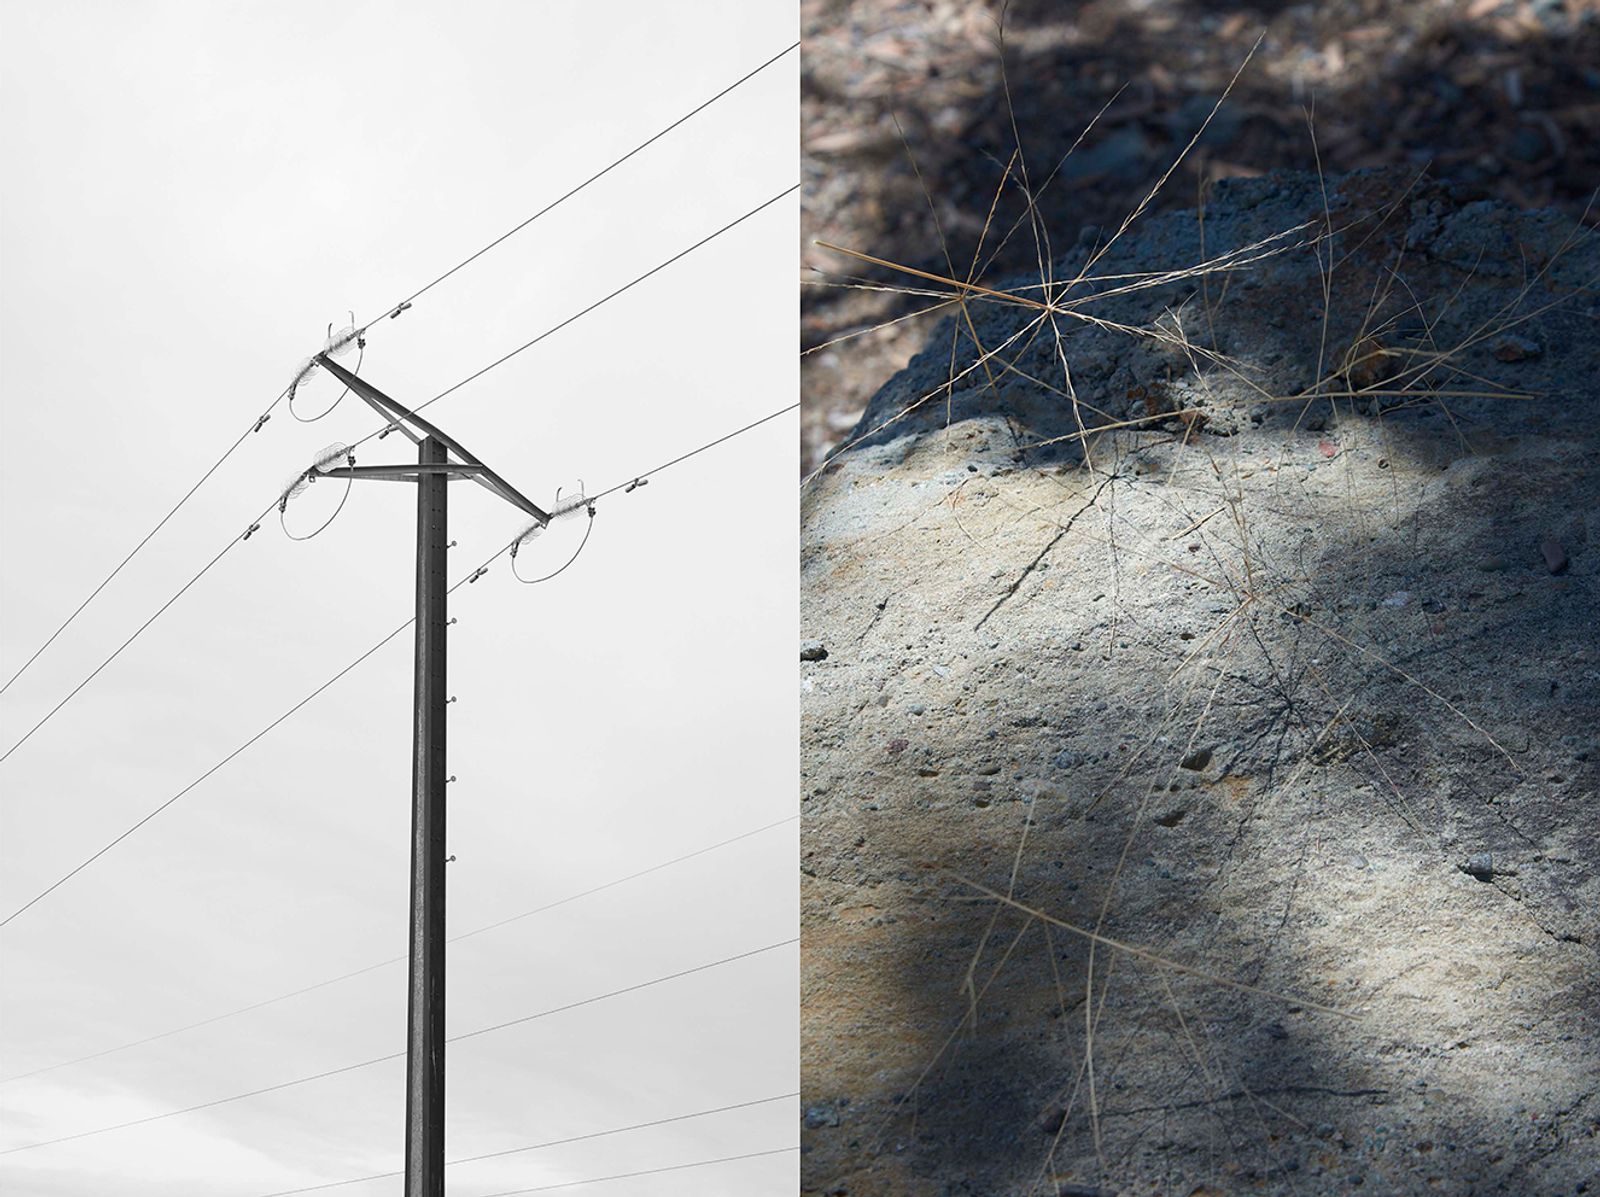 © Tanya Houghton - Image from the Songlines of the HERE+NOW photography project